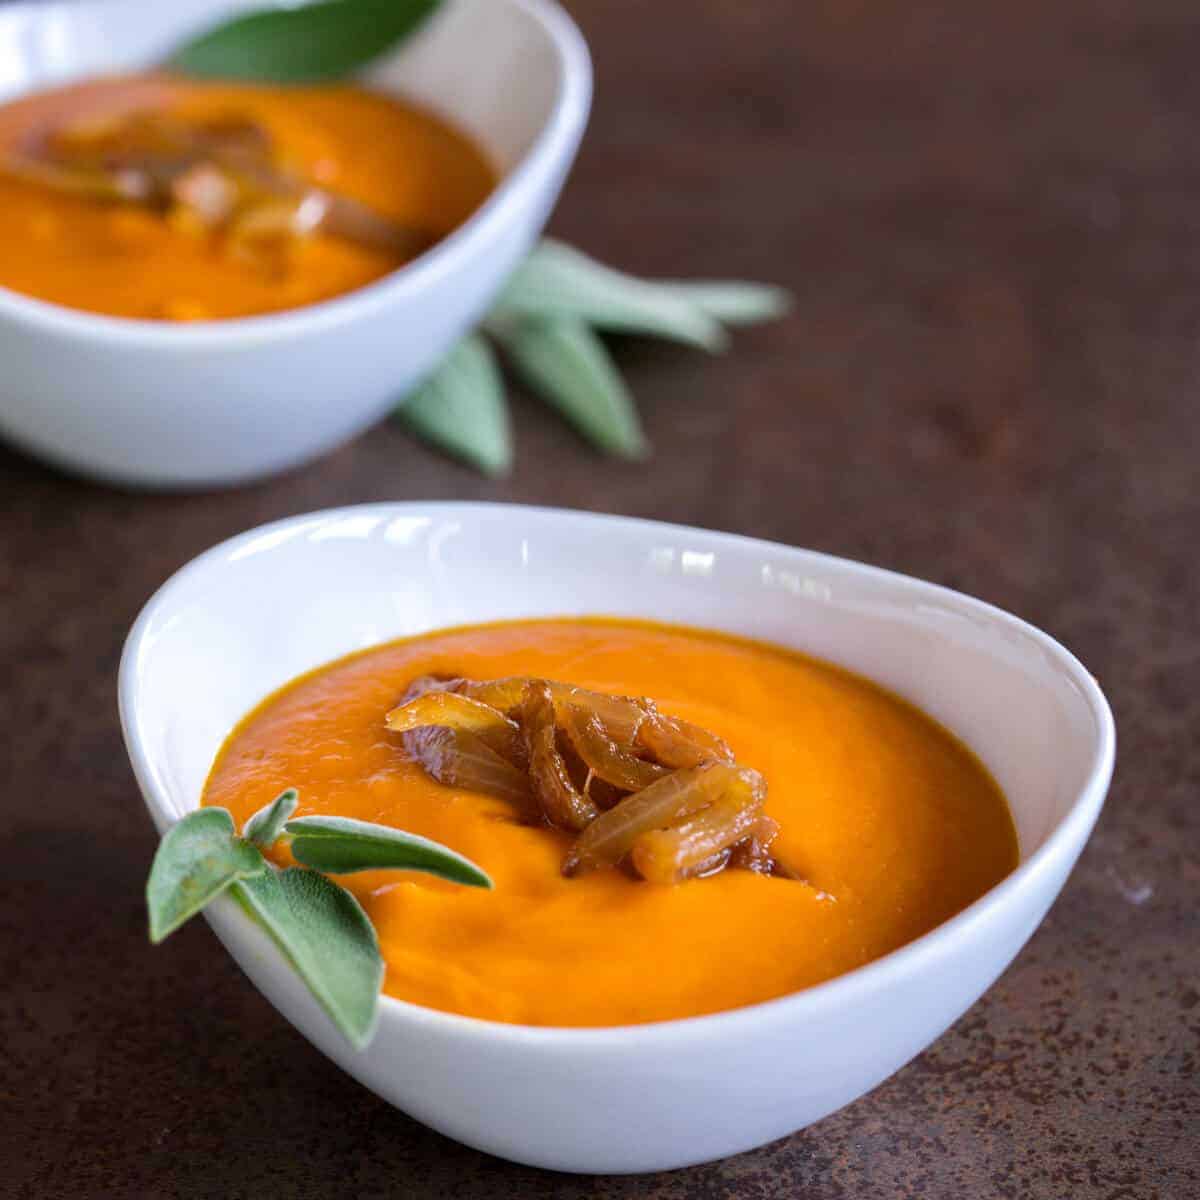 two bowls of a roasted pumpkin soup garnished with fresh sage and caramelized onions.